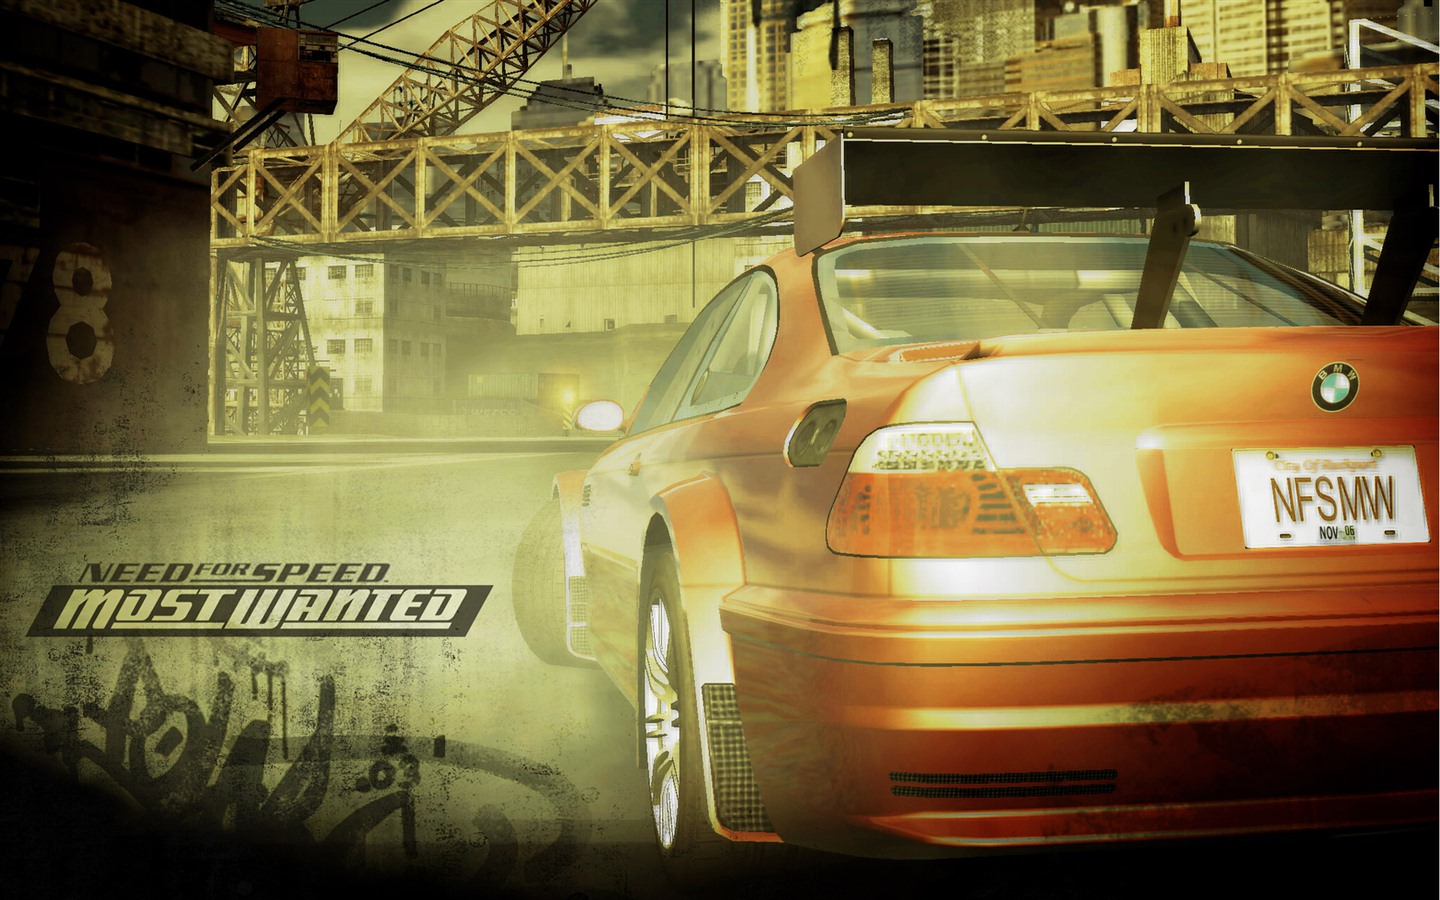 Need for Speed: Most Wanted 极品飞车17：最高通缉 高清壁纸4 - 1440x900